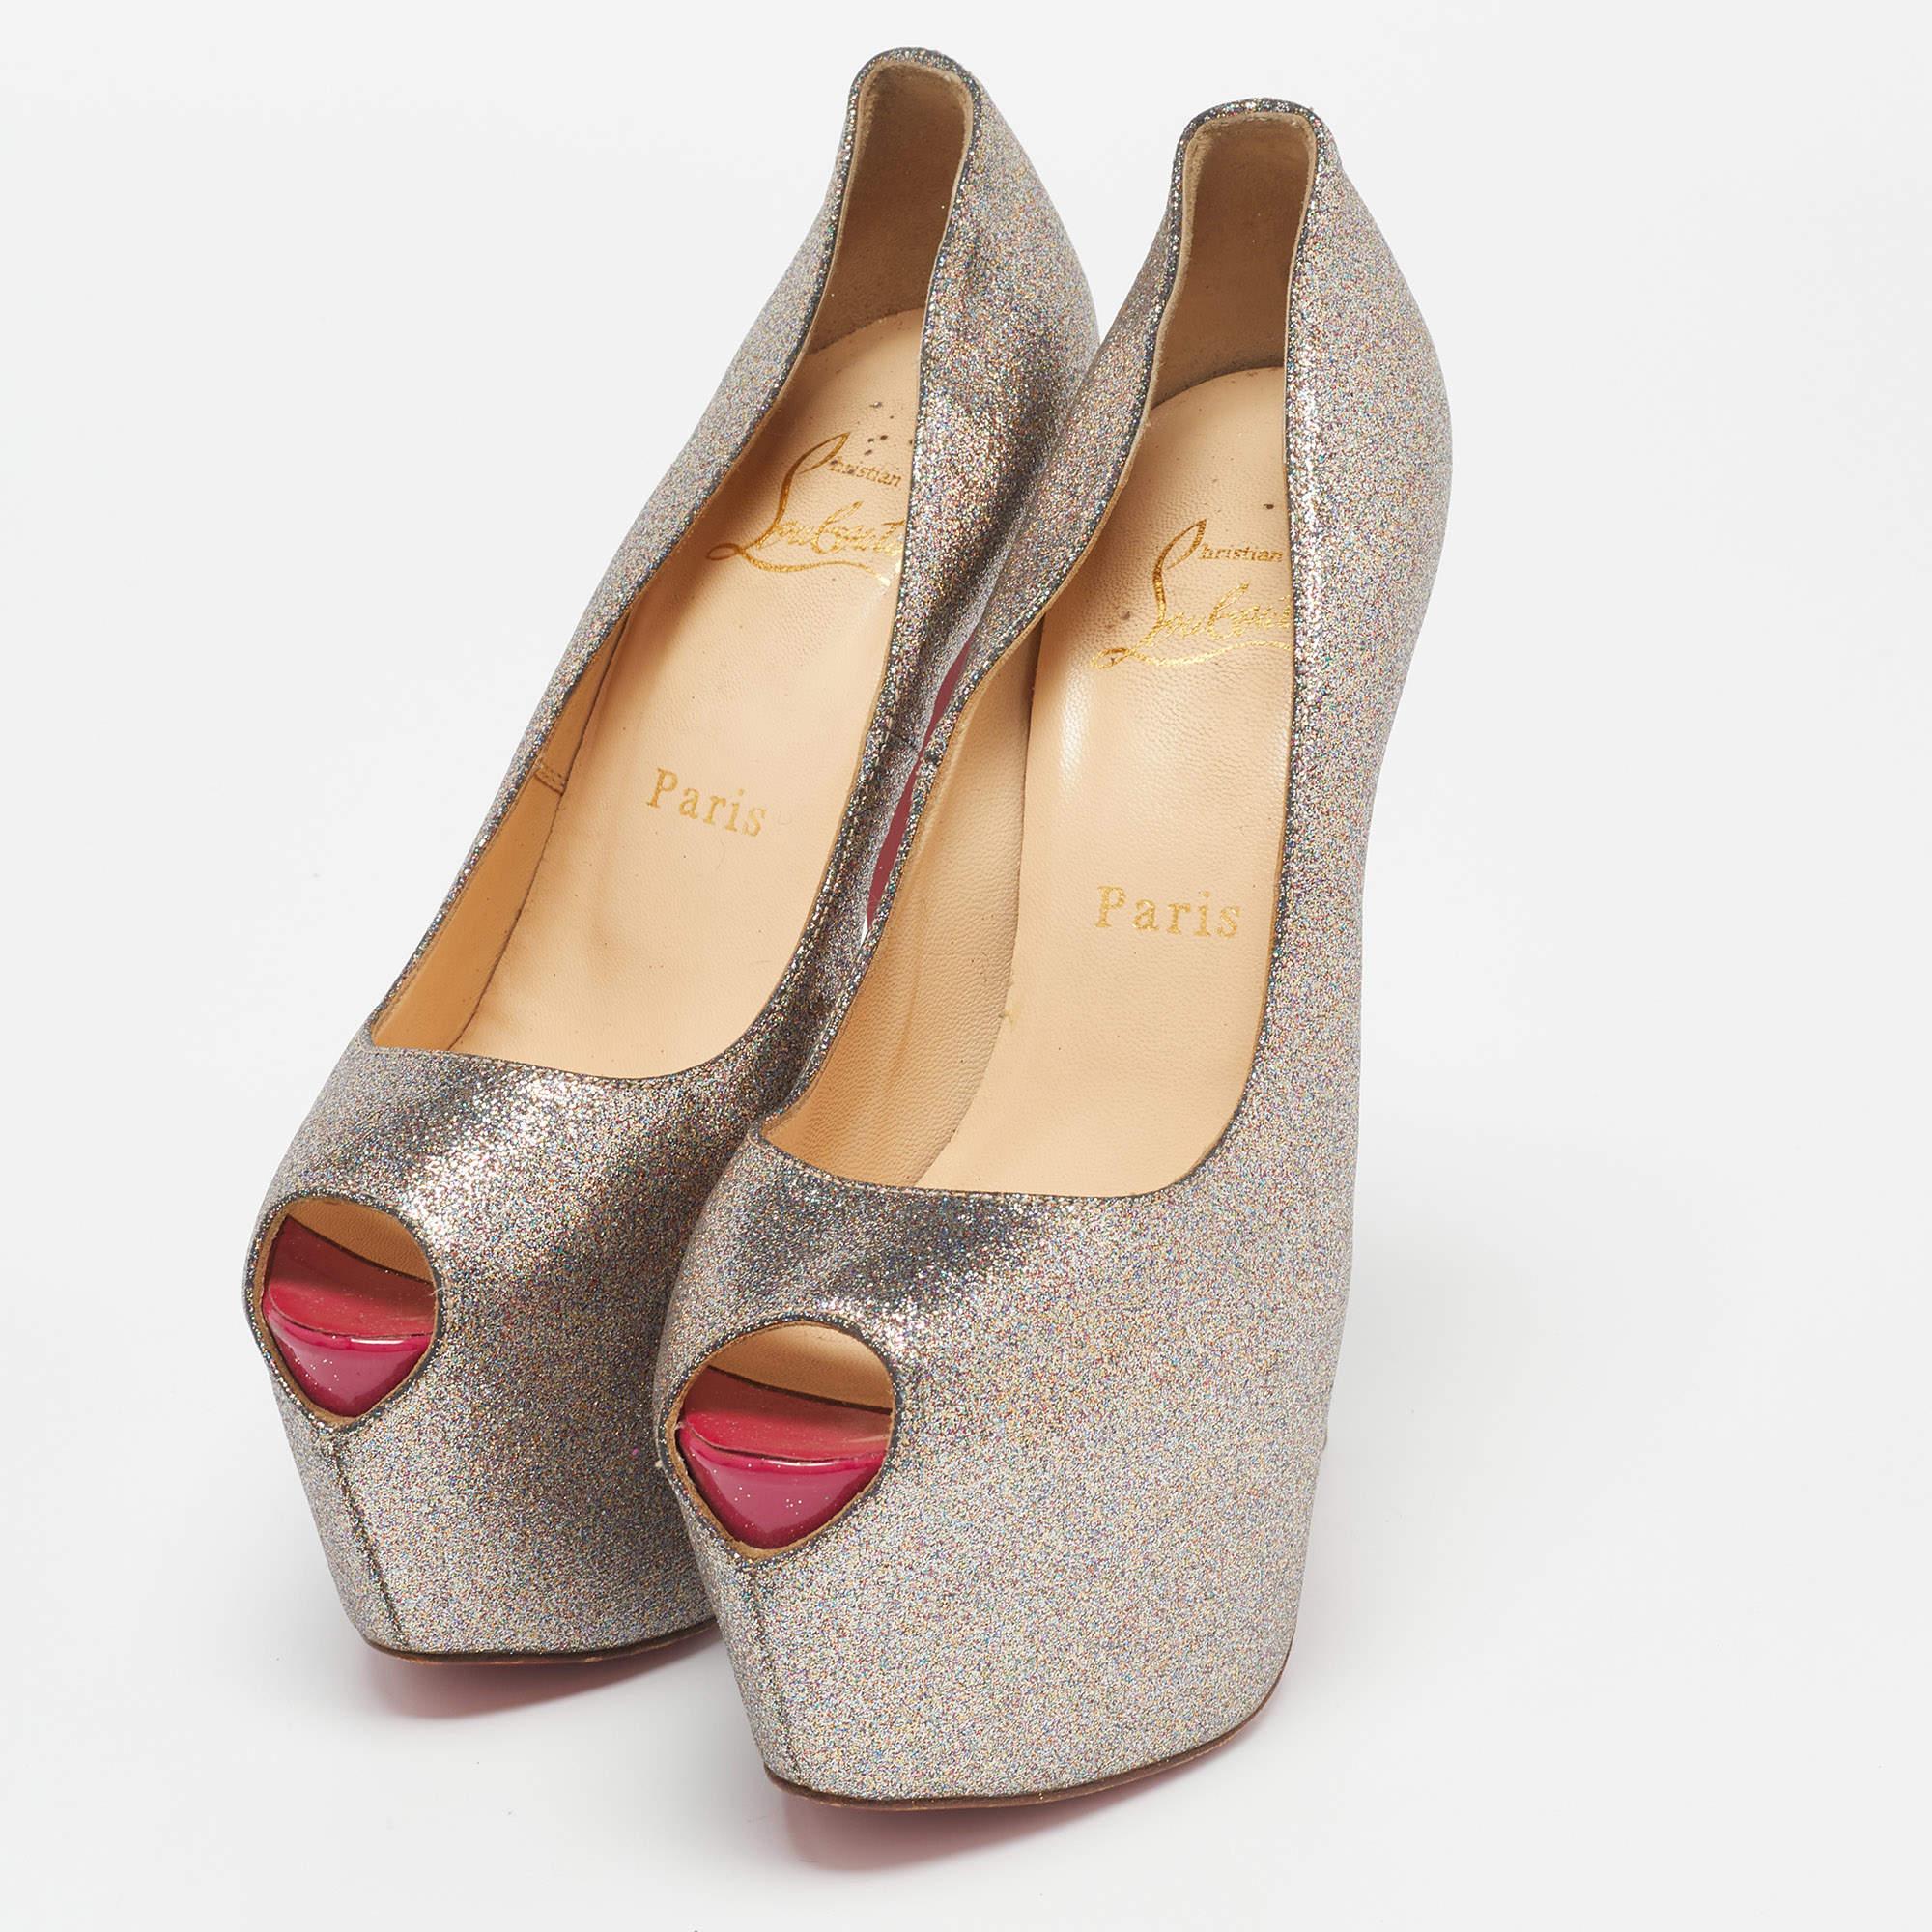 Christian Louboutin Metallic/Pink Glitter Leather Highness Pumps Size 36.5 In Good Condition For Sale In Dubai, Al Qouz 2